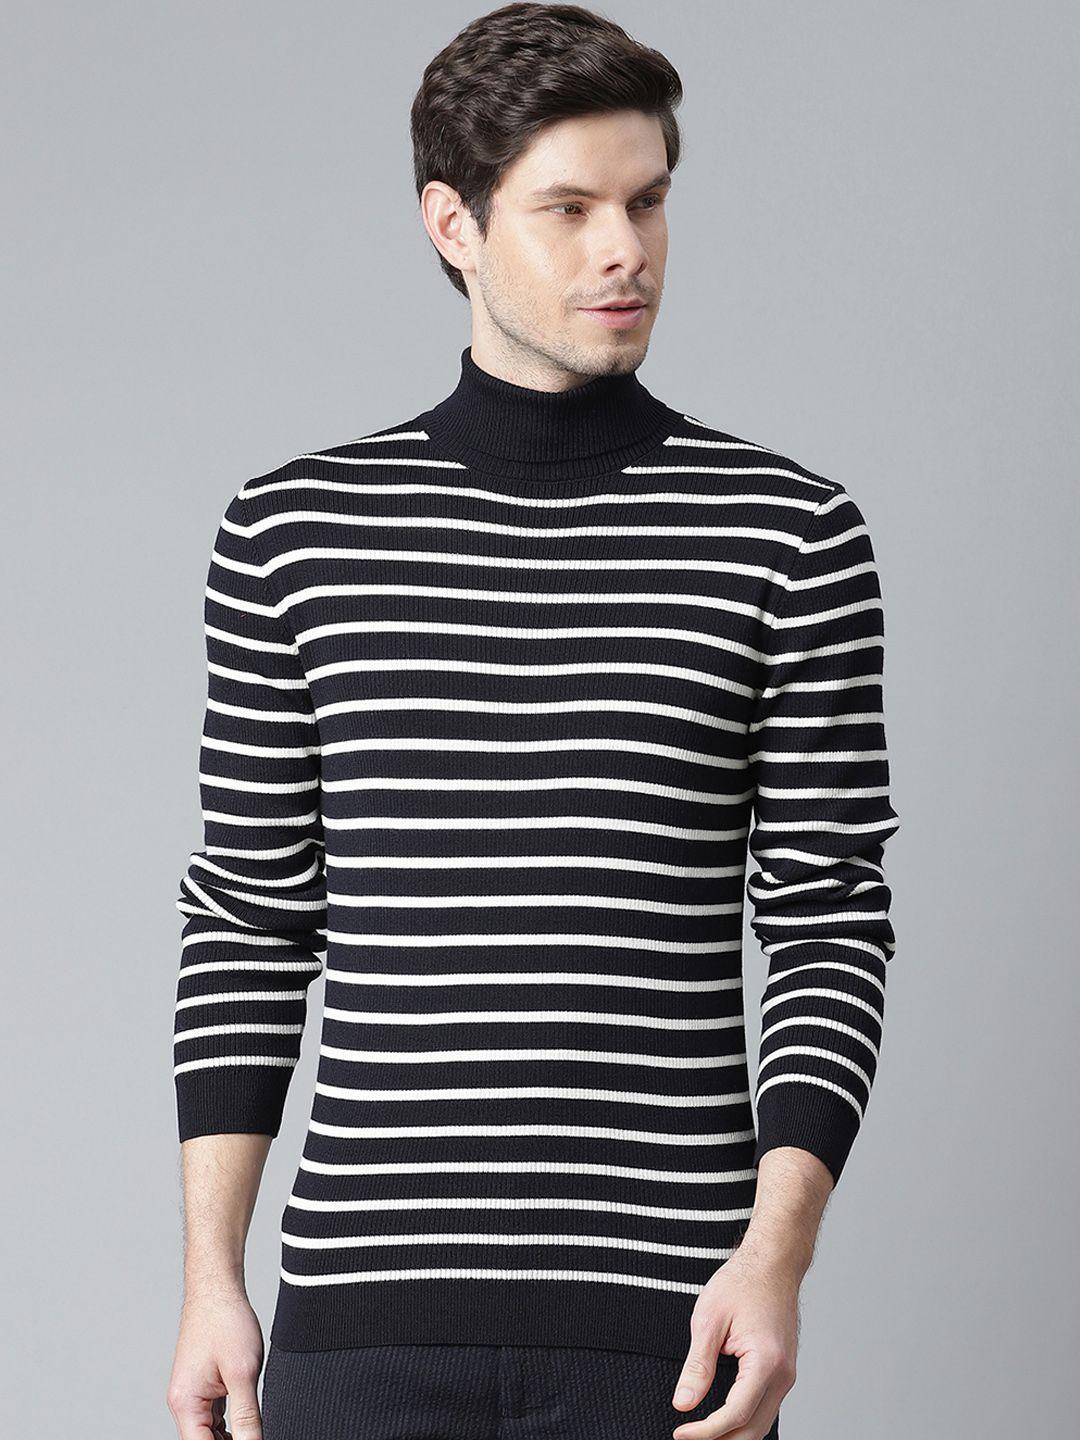 matinique men navy blue & white striped pullover